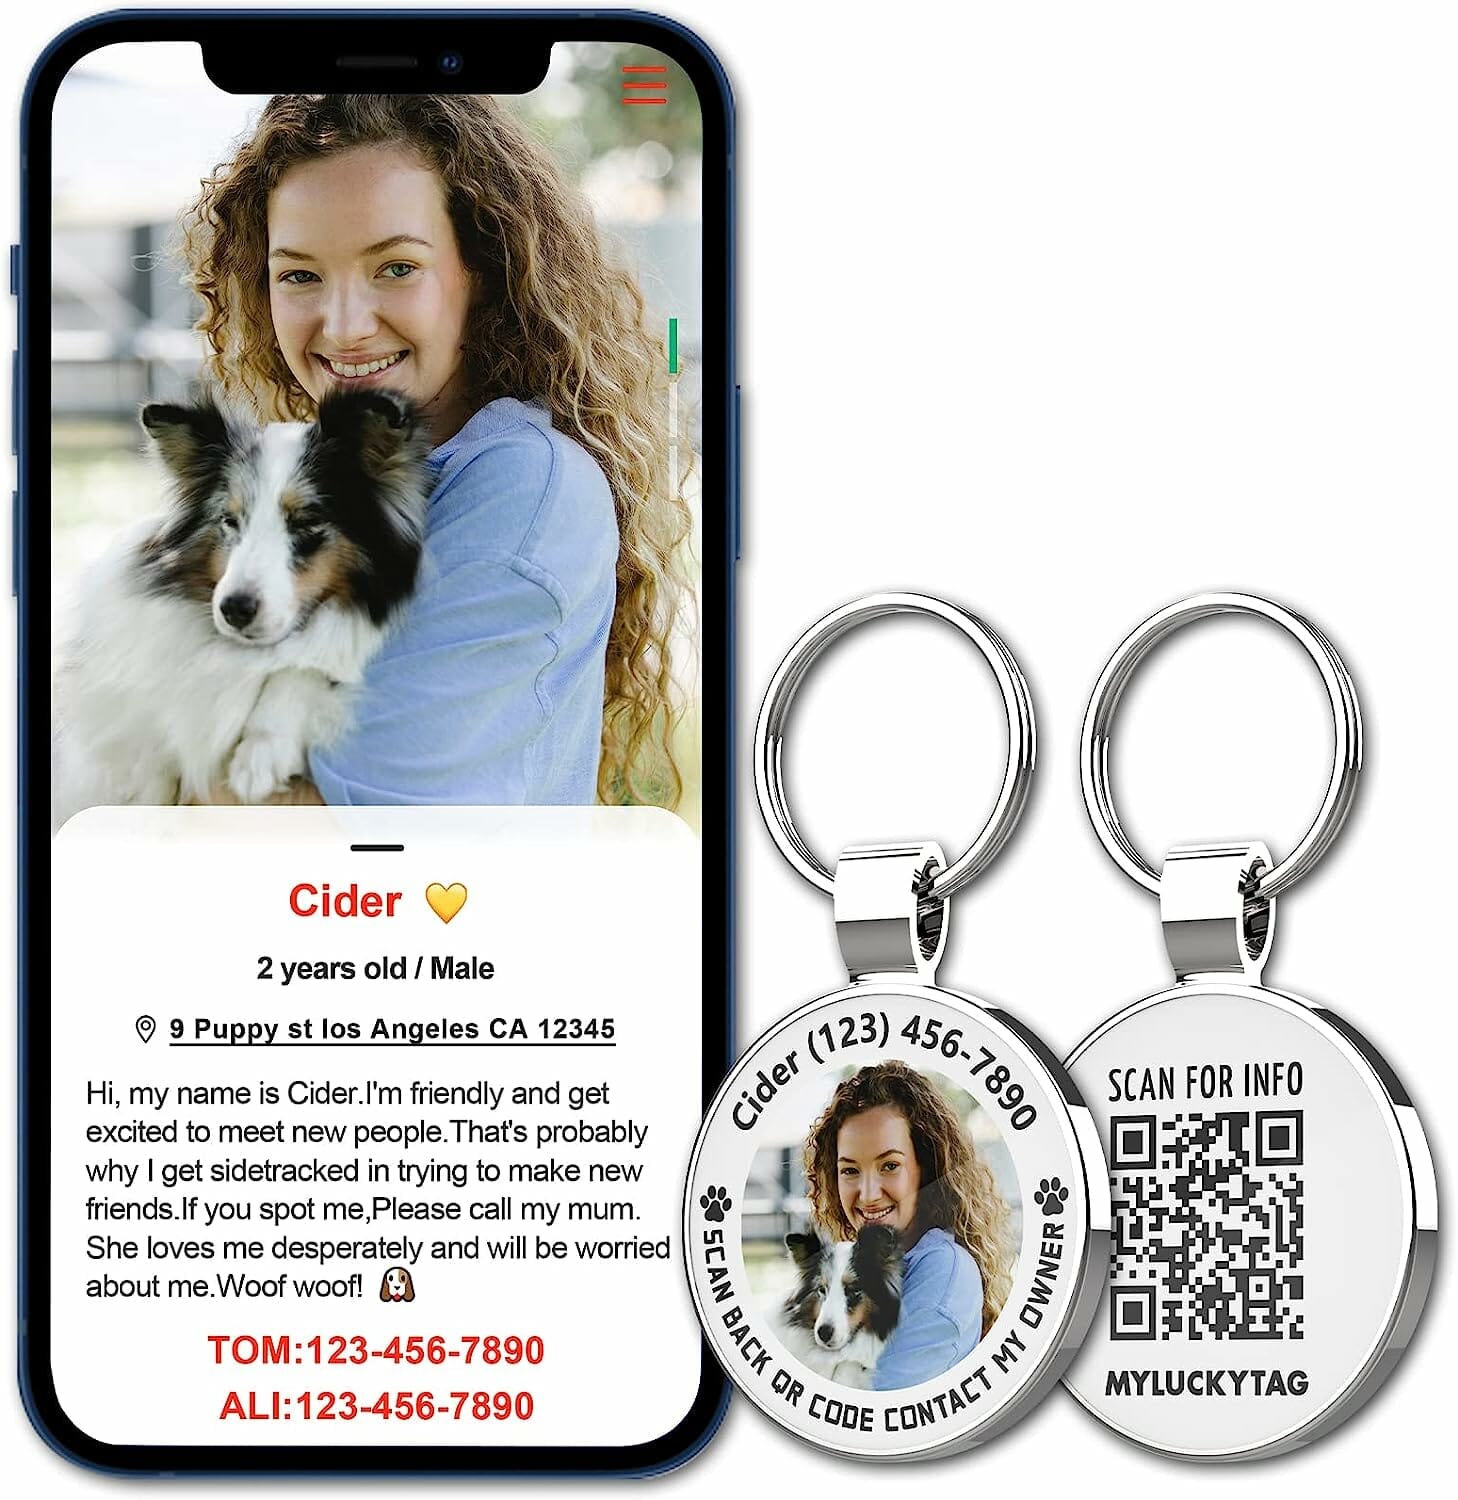 MYLUCKYTAG Personalized Pet ID Tags